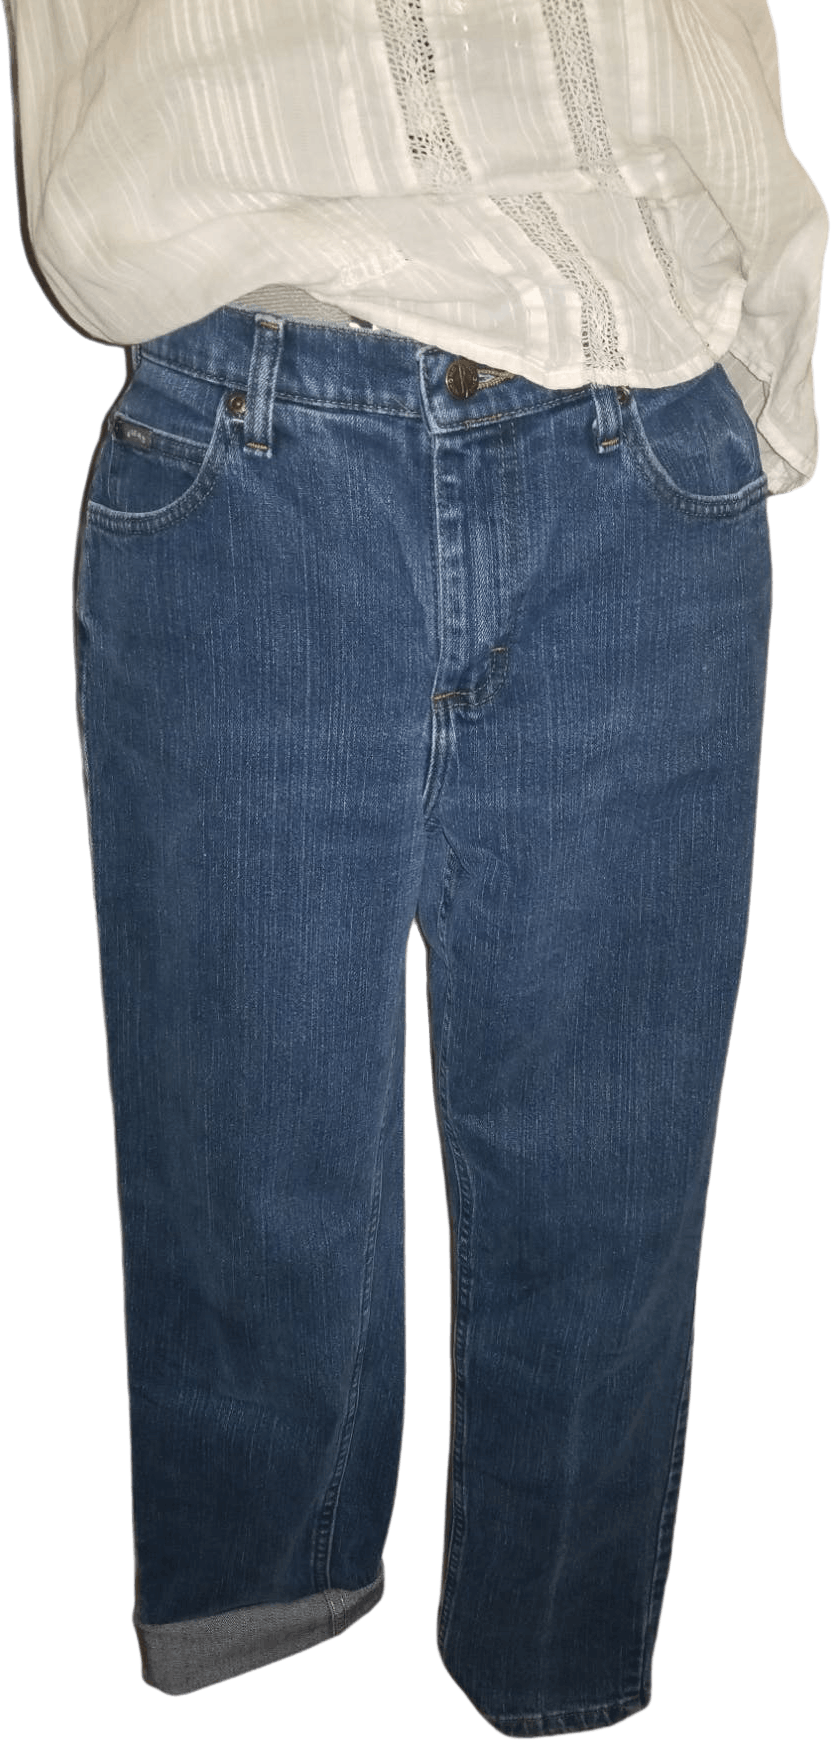 Vintage Medium Wash High Waisted Jeans by Riders by Lee | Shop THRILLING